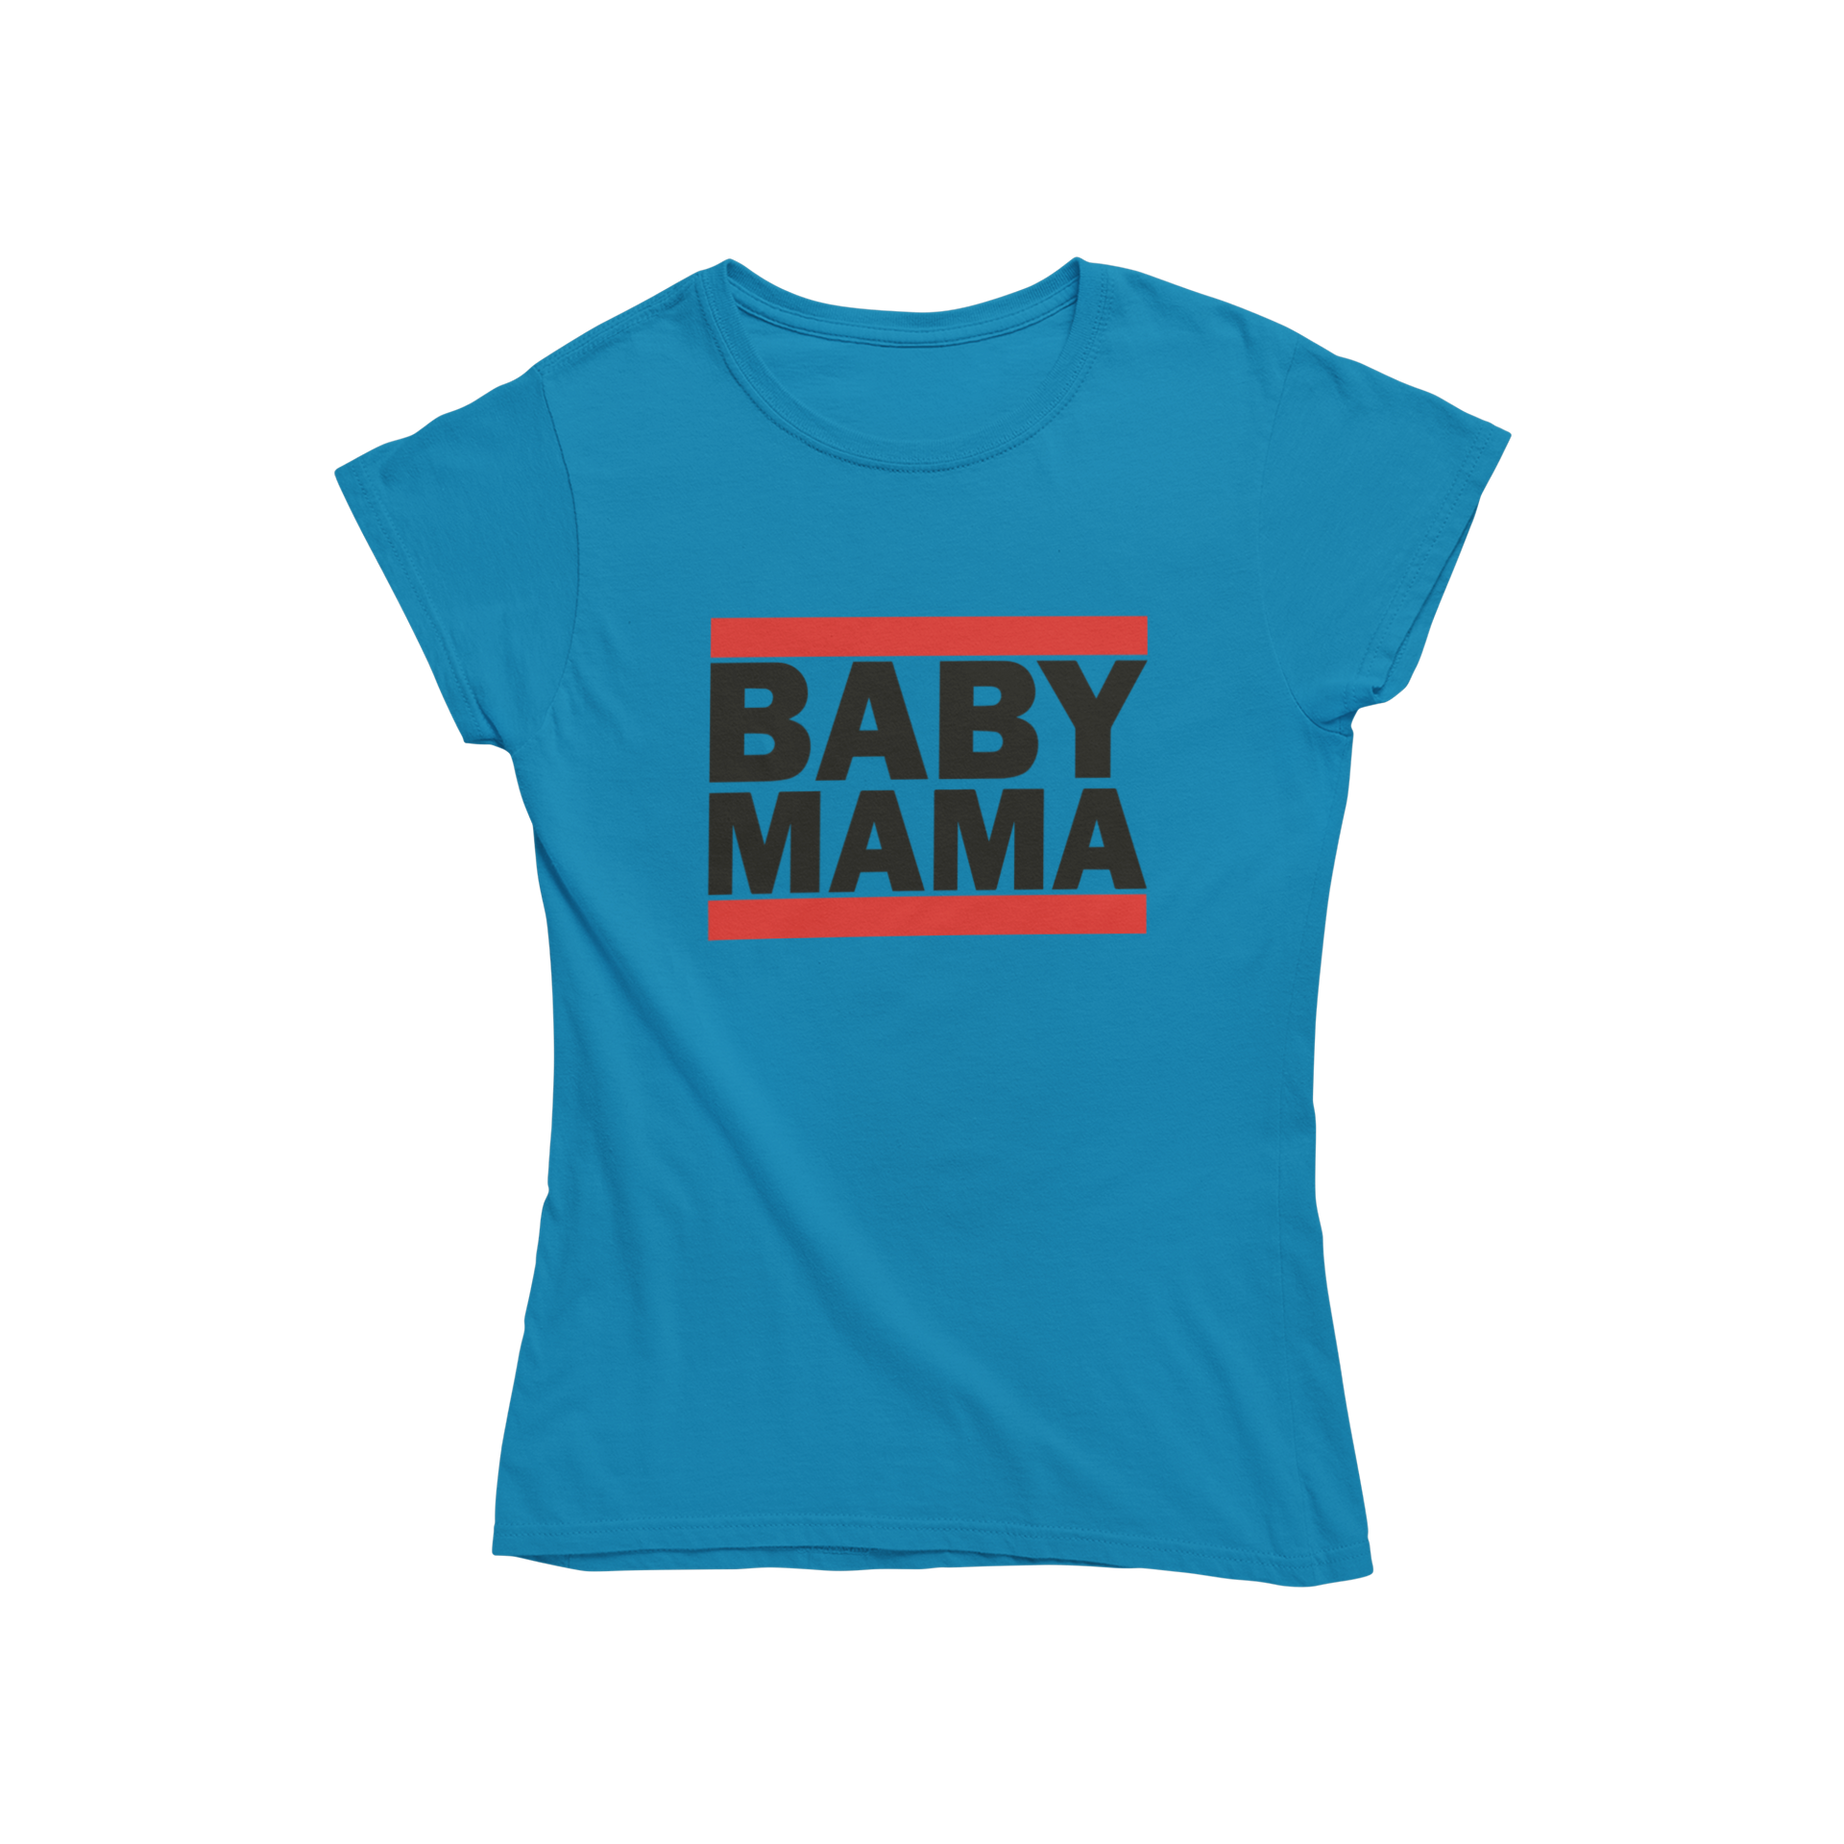 Looking for a unique gift for the baby mama in your life? Check out Teevolution! Our women's fitted t-shirt features the print "Baby Mama" on the front. Perfect for any new mum or mum-to-be. Shop now and surprise your favorite baby mama!